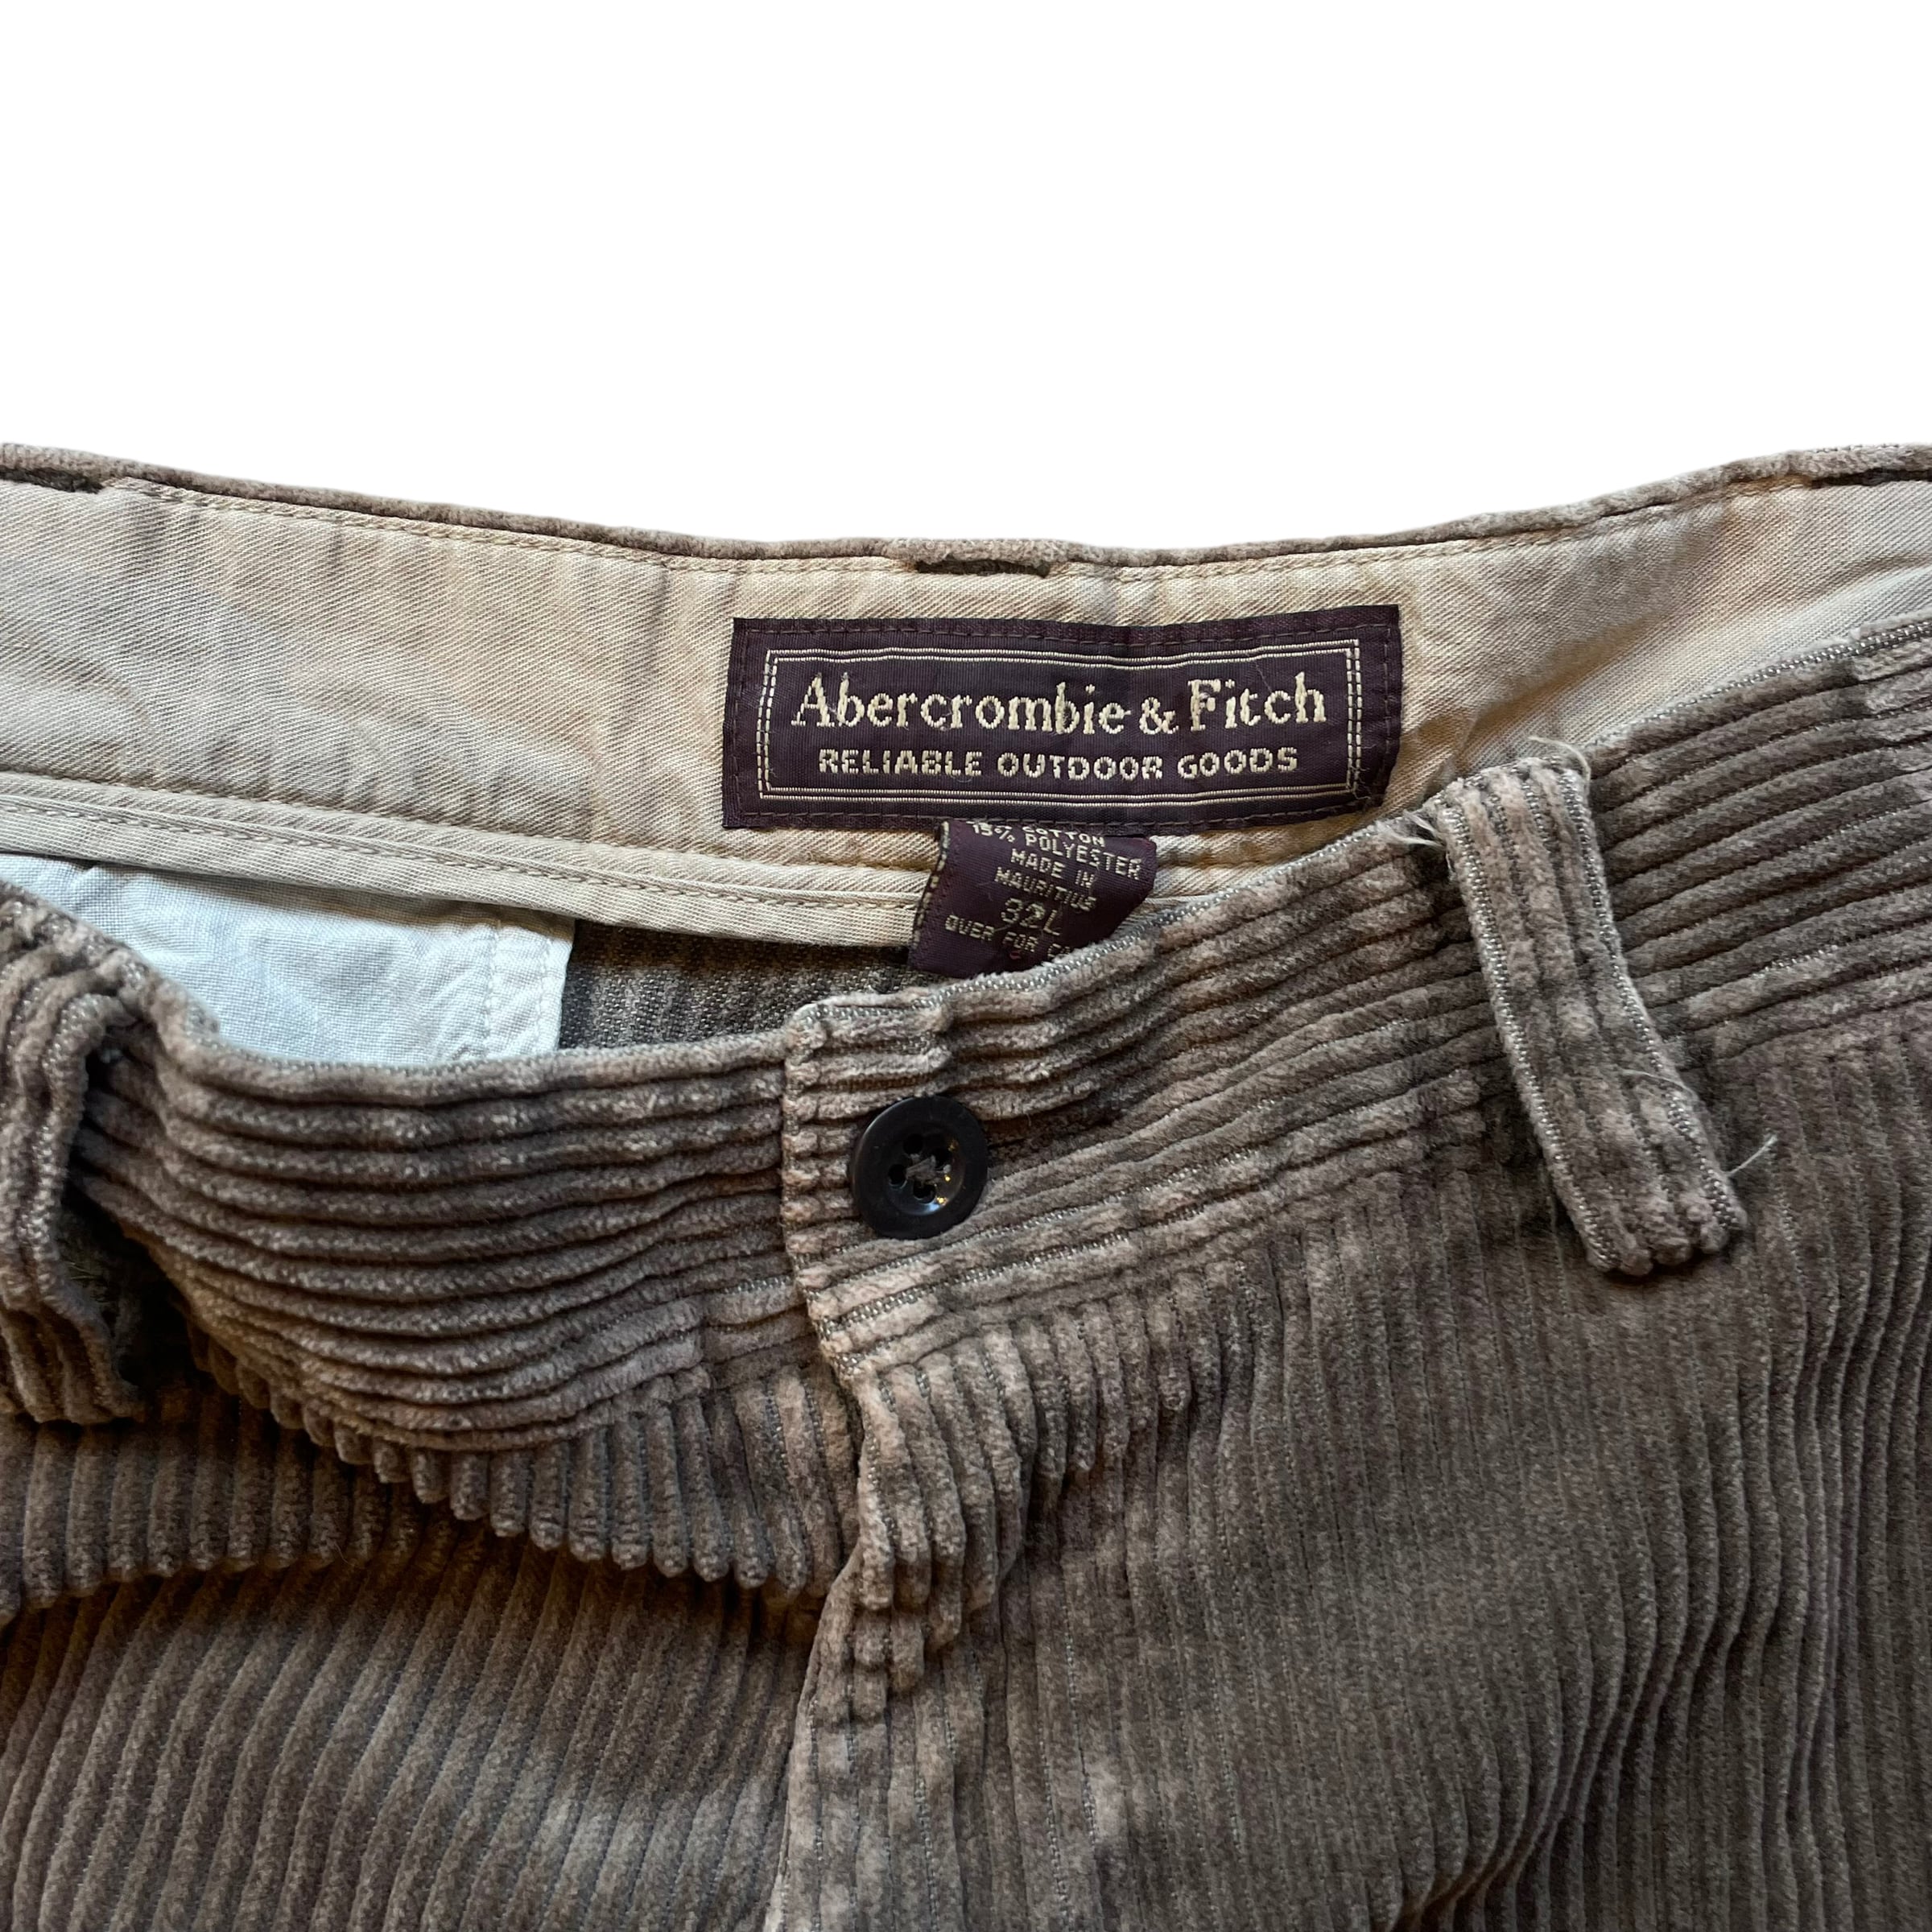 Abercrombie & Fitch 太畝コーデュロイパンツ size 32 col Brown